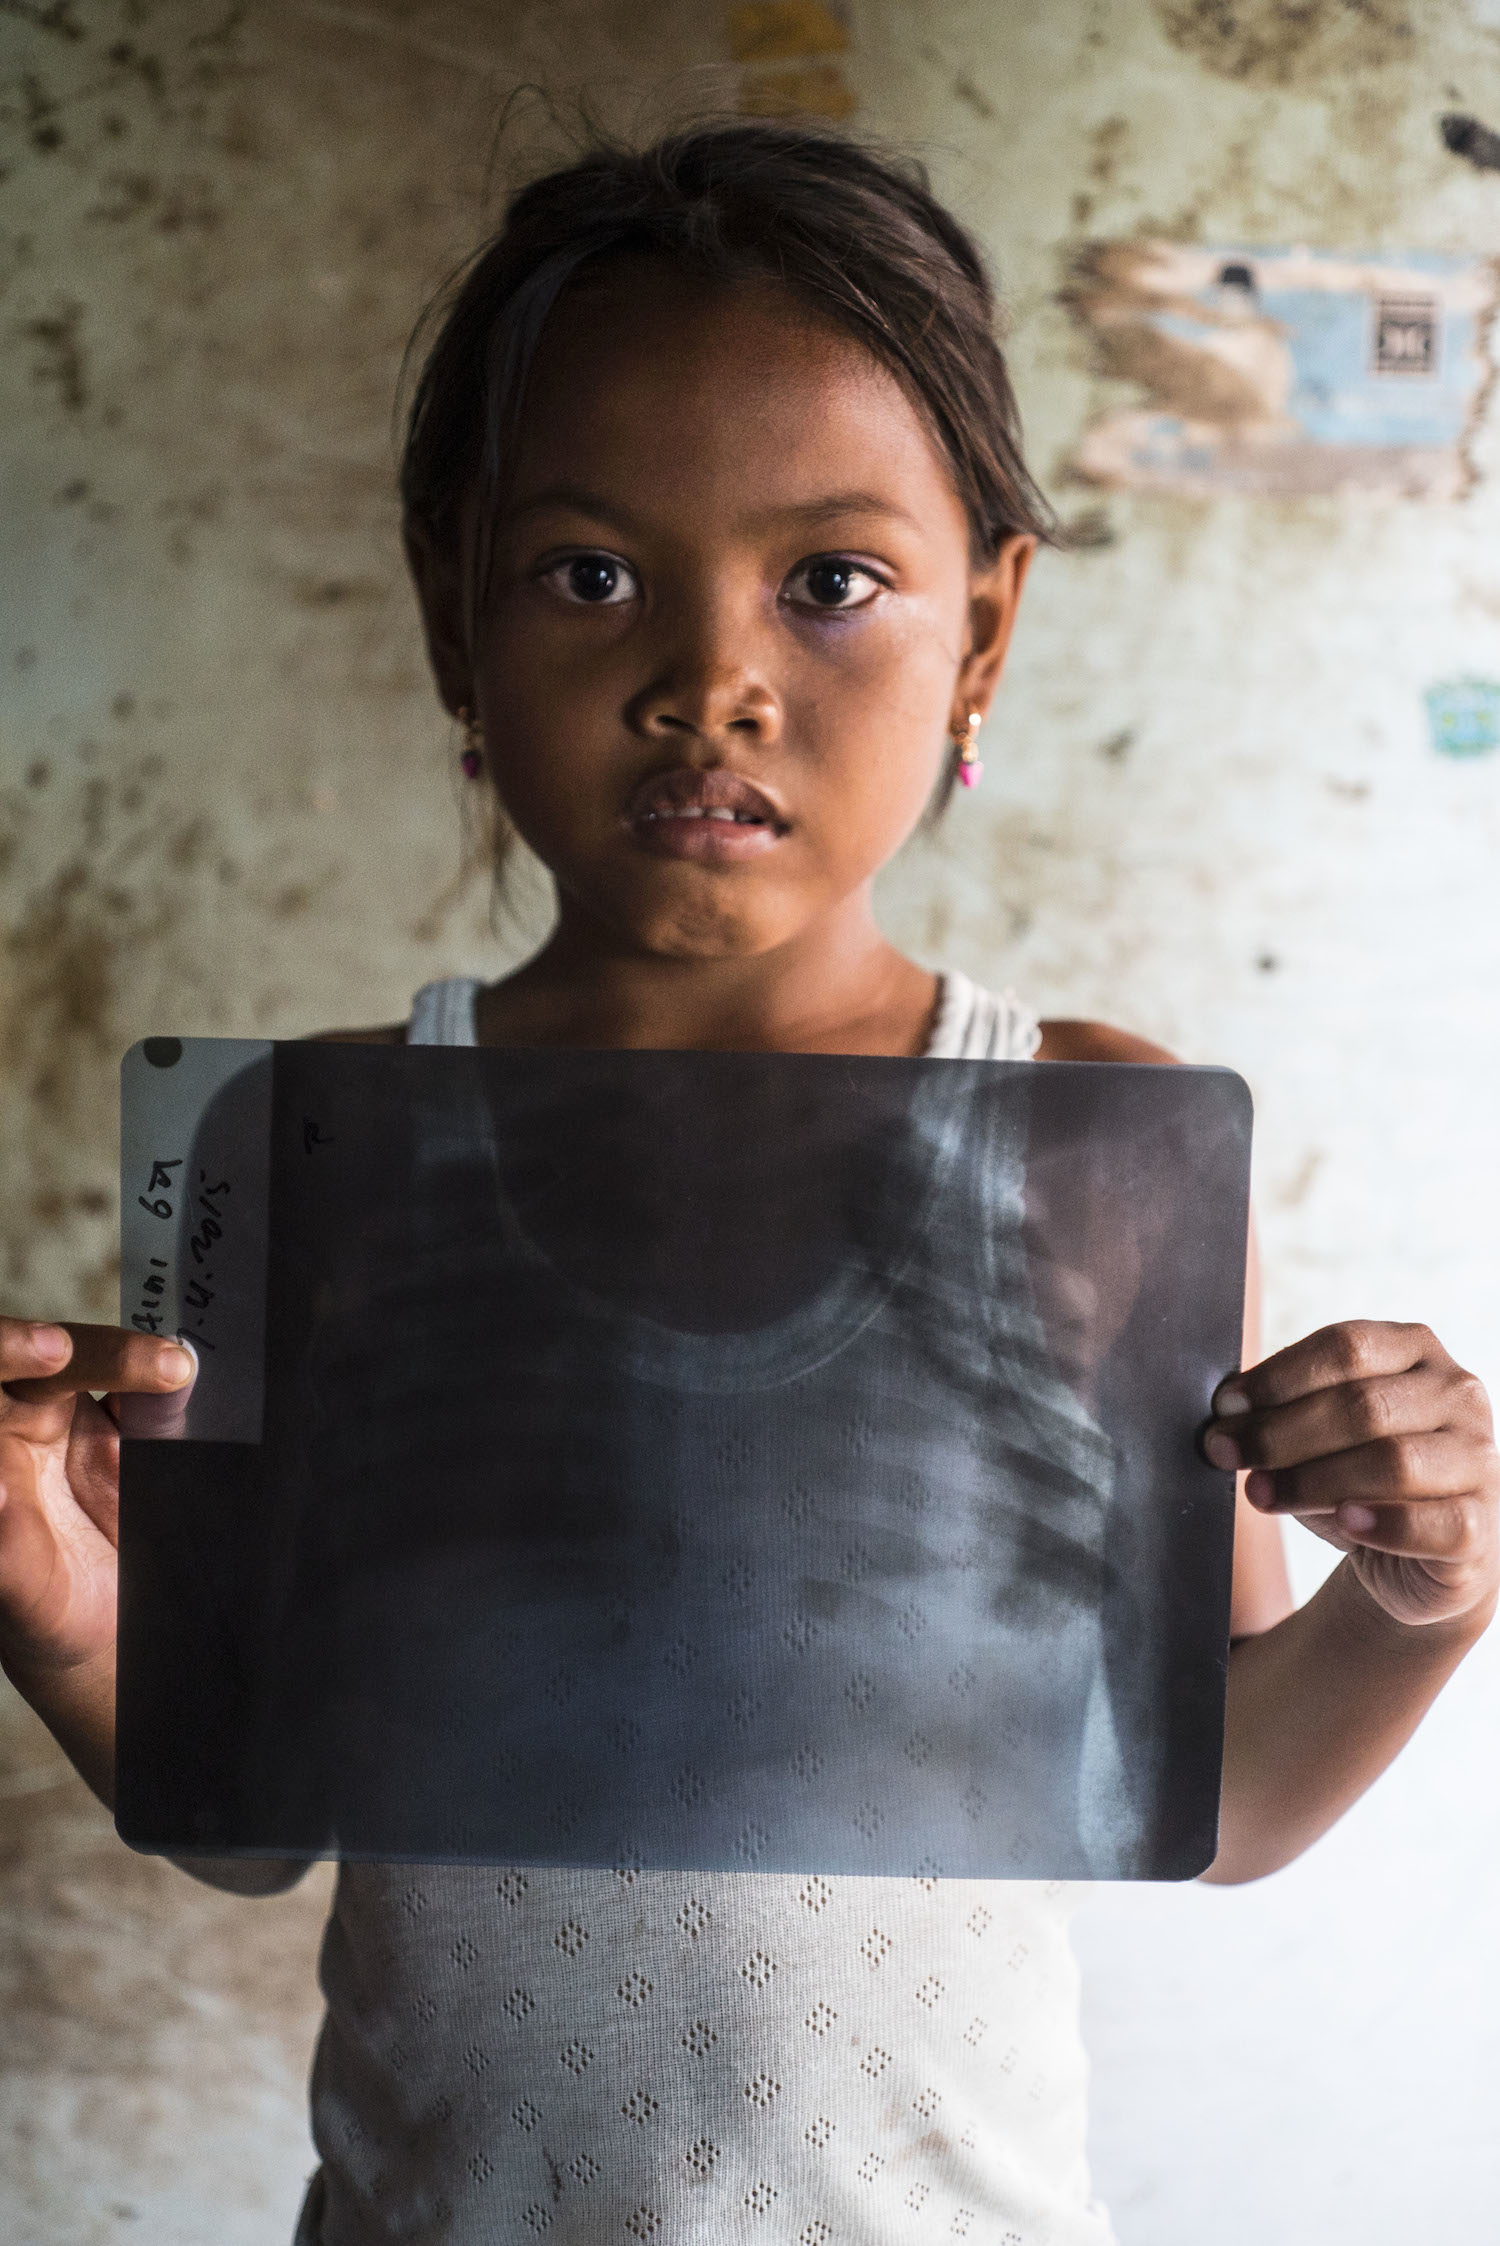 8 year-old Aini holds her chest X-Ray, showing specks in her lungs at her home near the Indramayu coal-fired power station in West Java on 25 January 2017. "Agriculture productivity gets lower and unemployments are everywhere since productive lands got evicted, the dust from the coal also give bad impact to the locals' health," said locals.( Photo with permission form her parents ). Photo by Ardiles Rante for 350.org